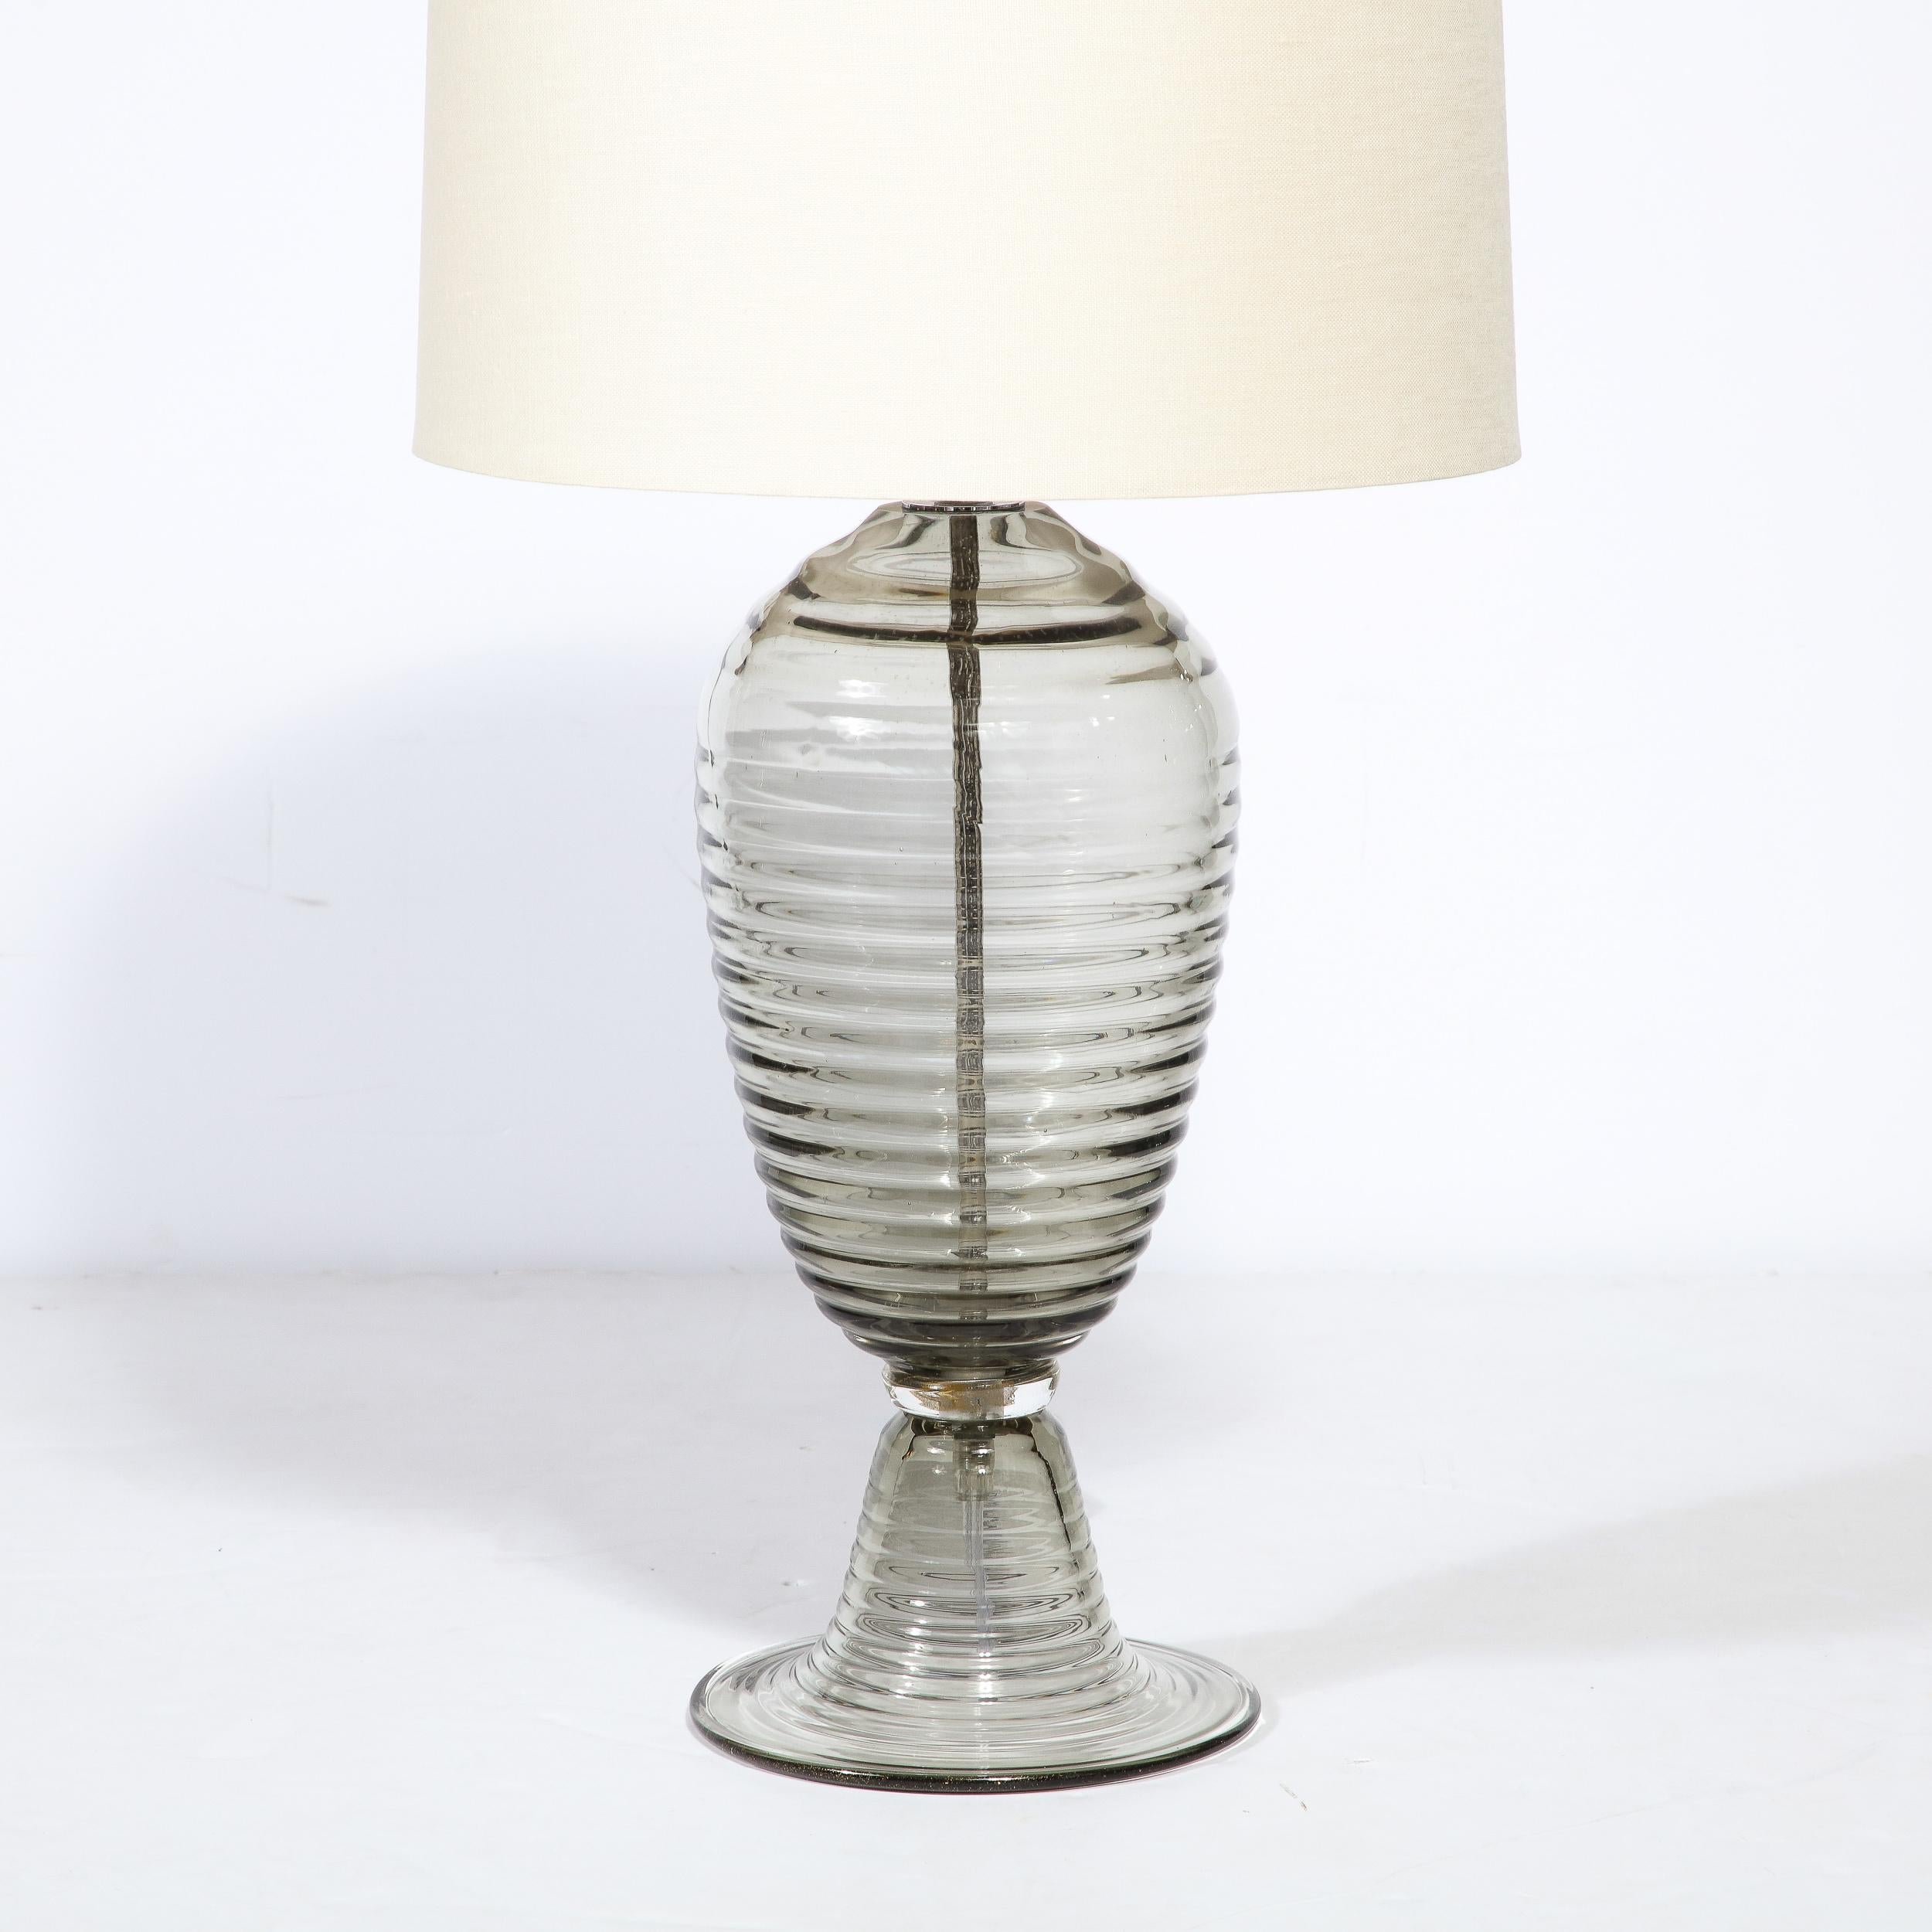 Italian Modernist Art Deco Style Hive Form Hand-Blown Murano Smoked Glass Table Lamps For Sale